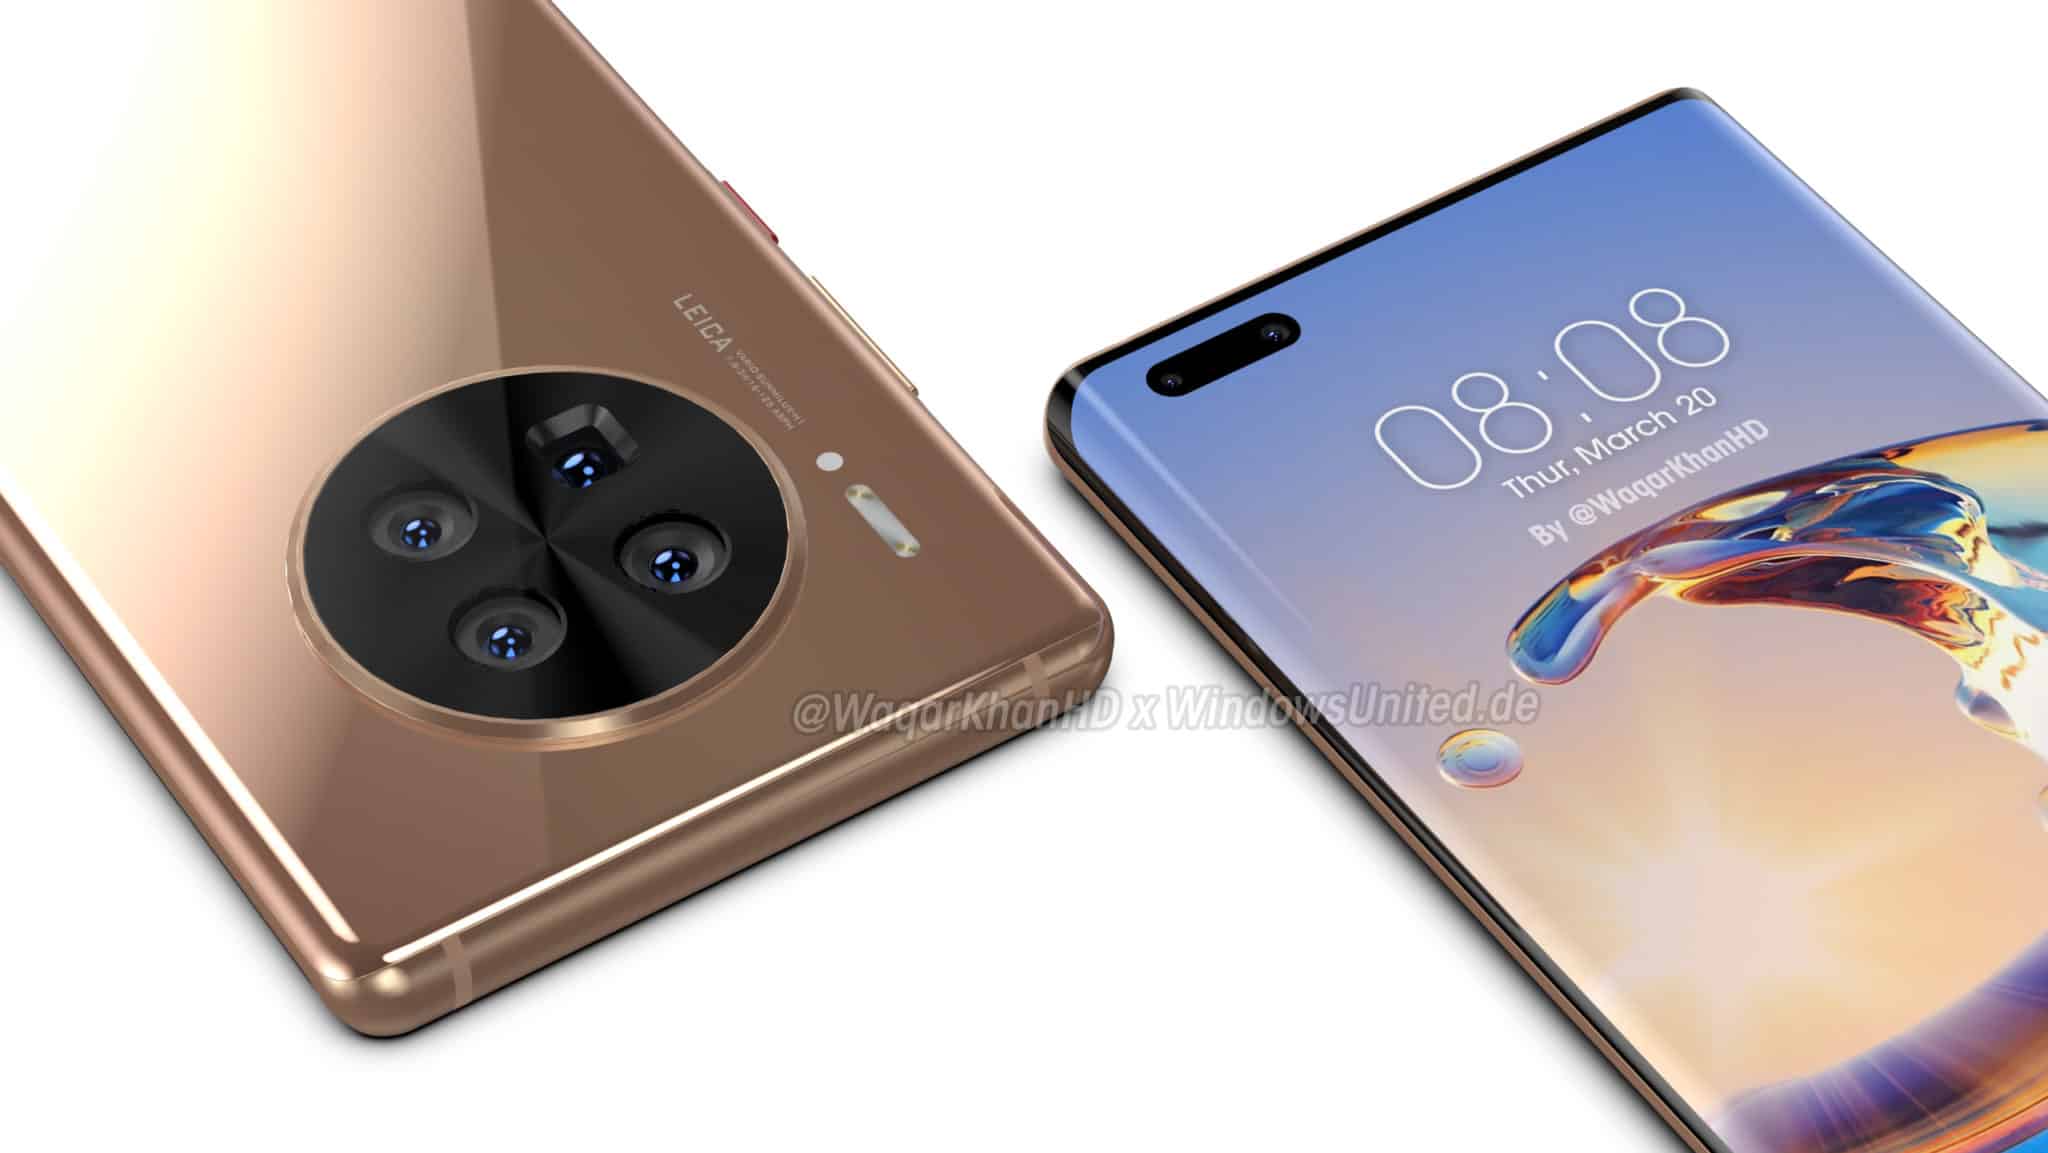 This is what the upcoming Huawei Mate 40 Pro could look like